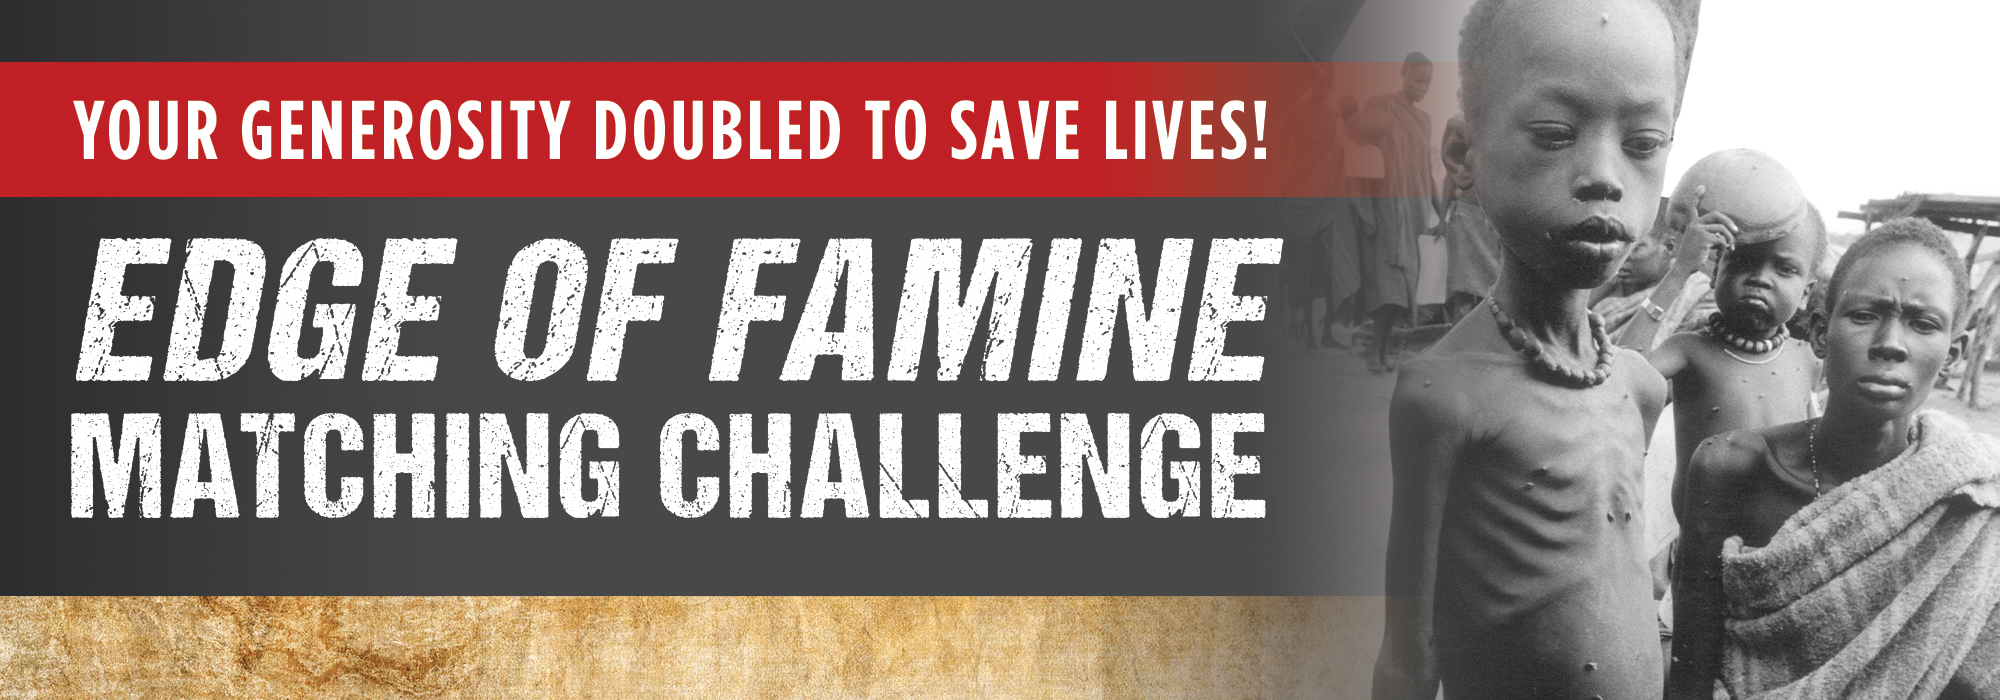 Your generosity doubled to save lives! Edge of famine matching challenge.